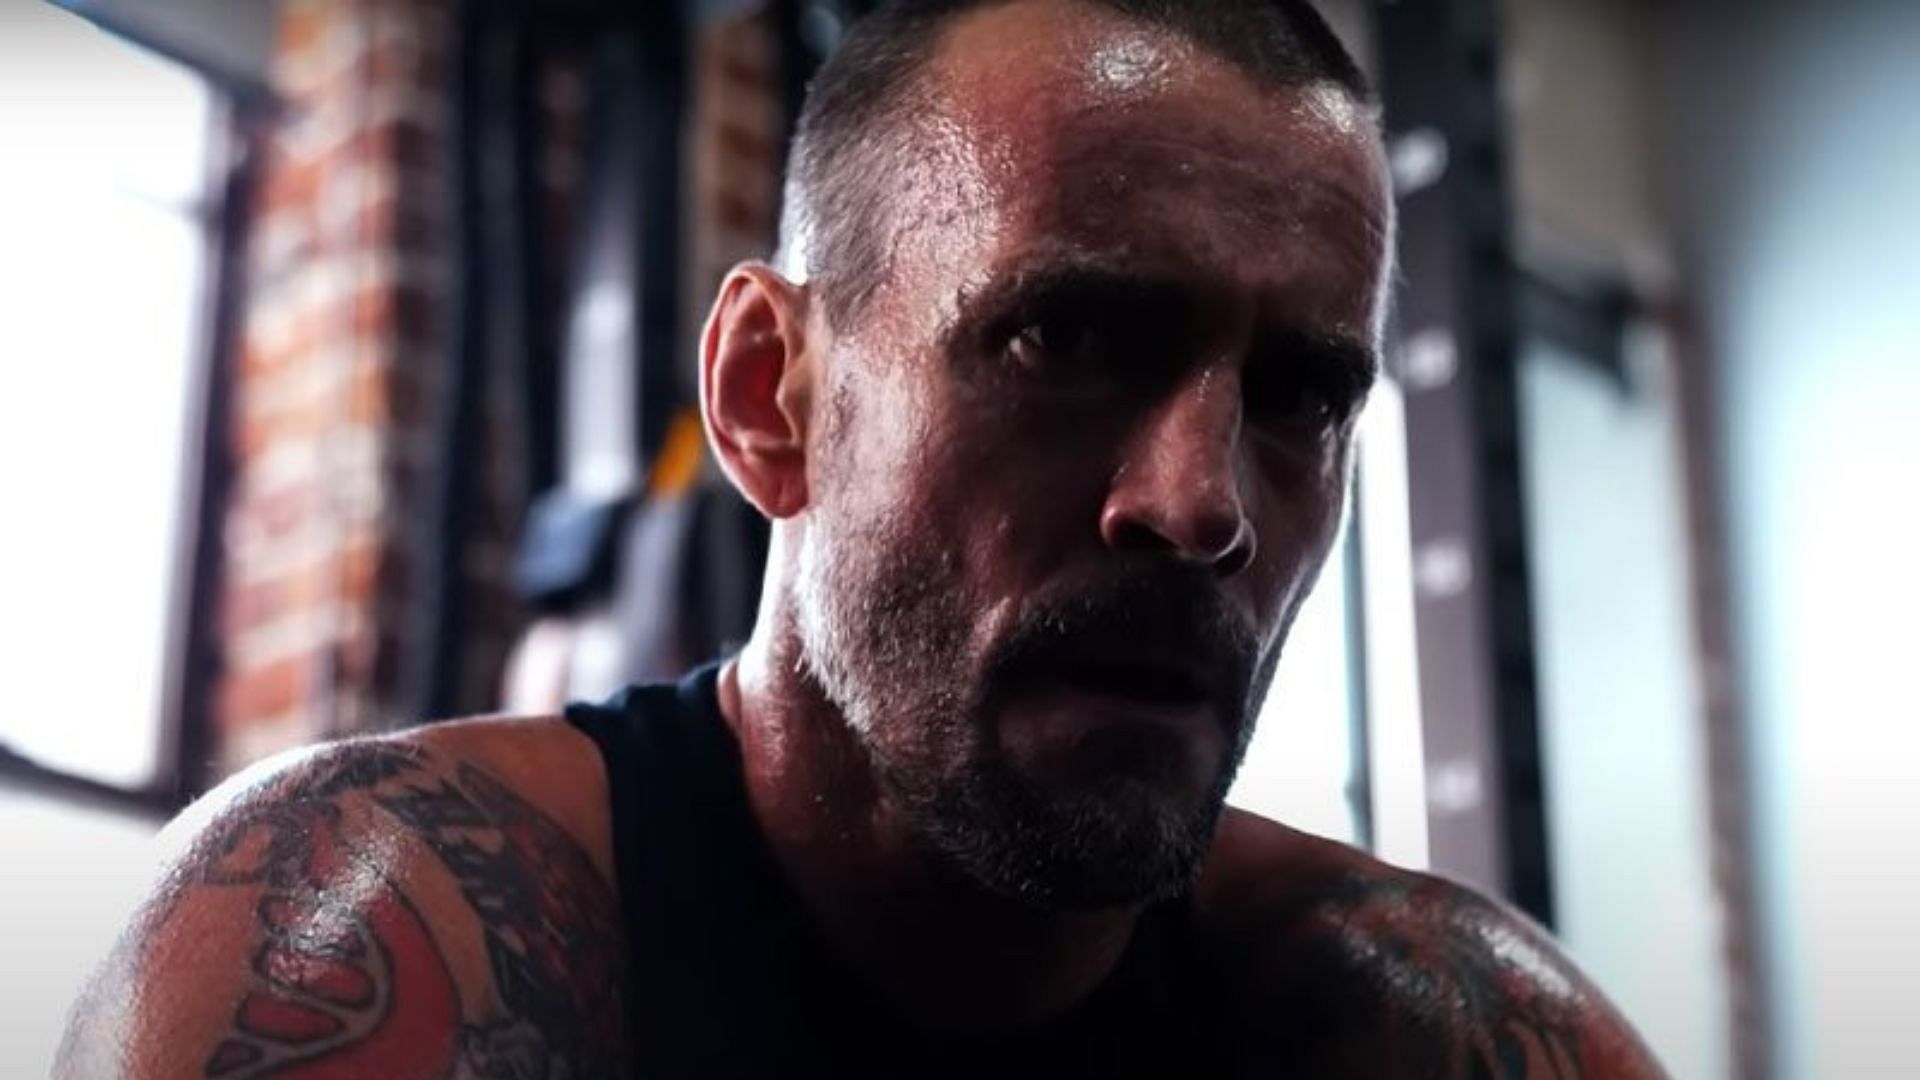 CM Punk is set to make his return to AEW